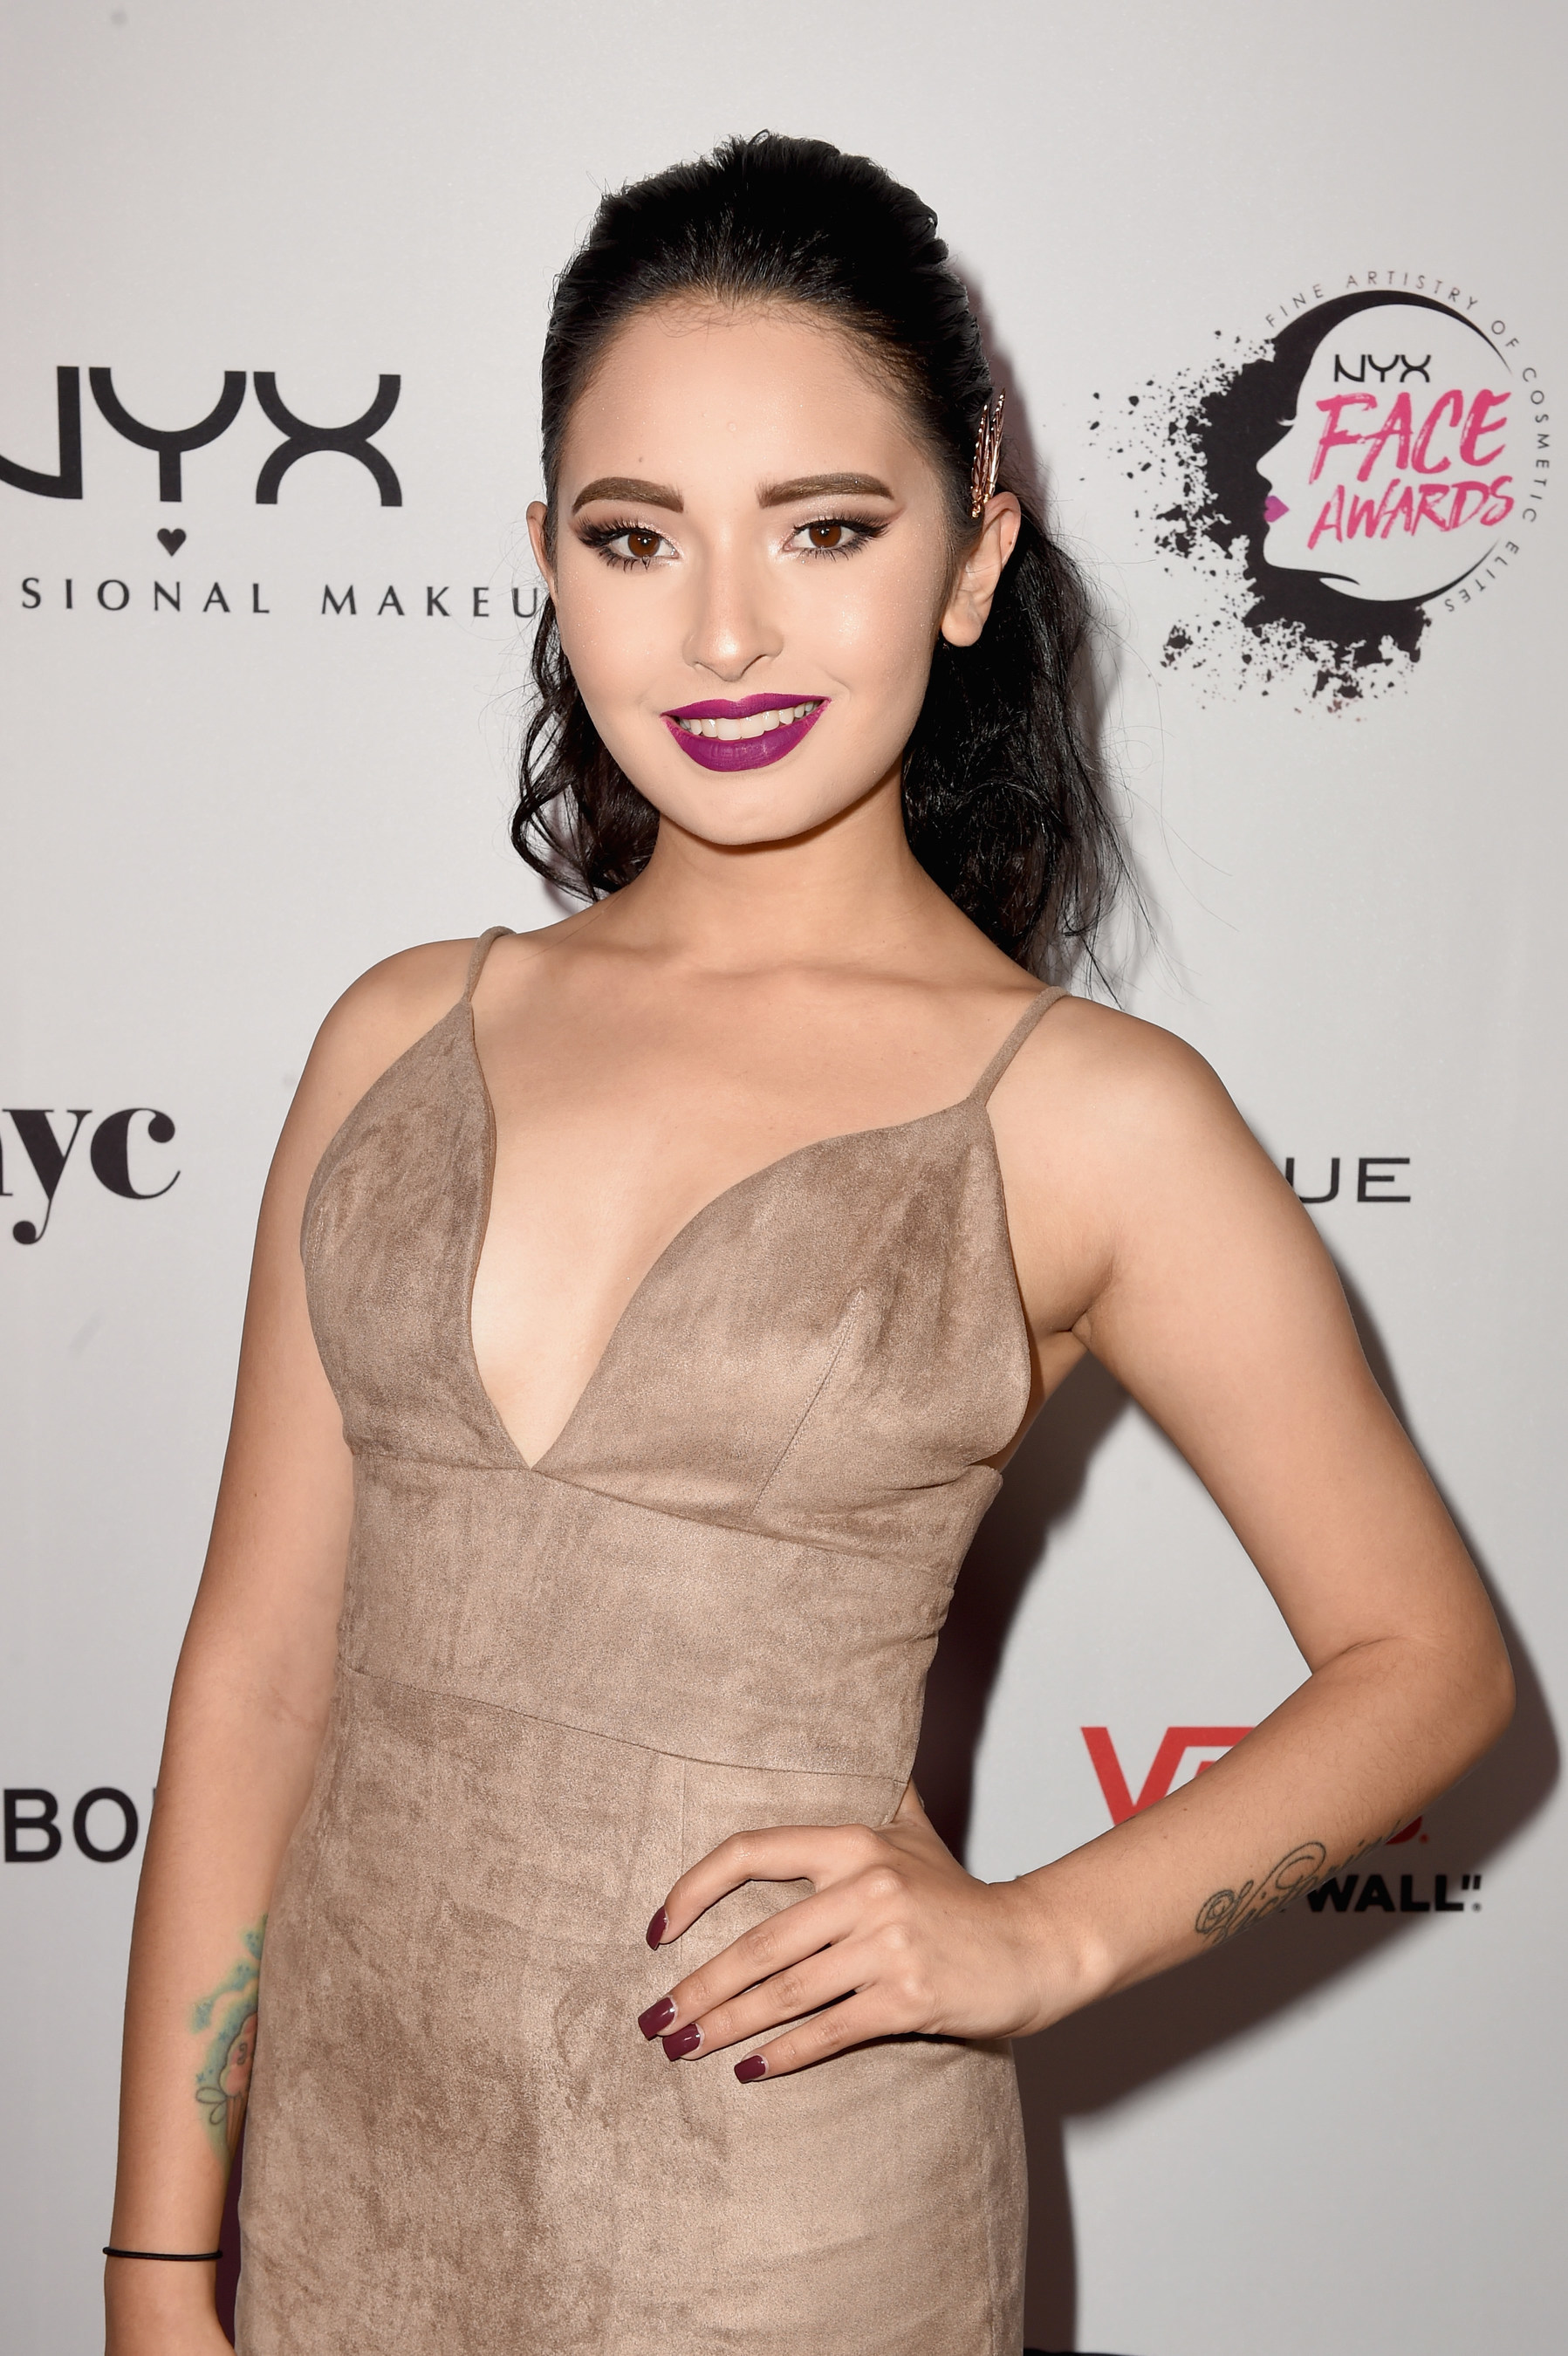 Laura Sanchez wins Beauty Vlogger of the year at the 2016 NYX FACE Awards